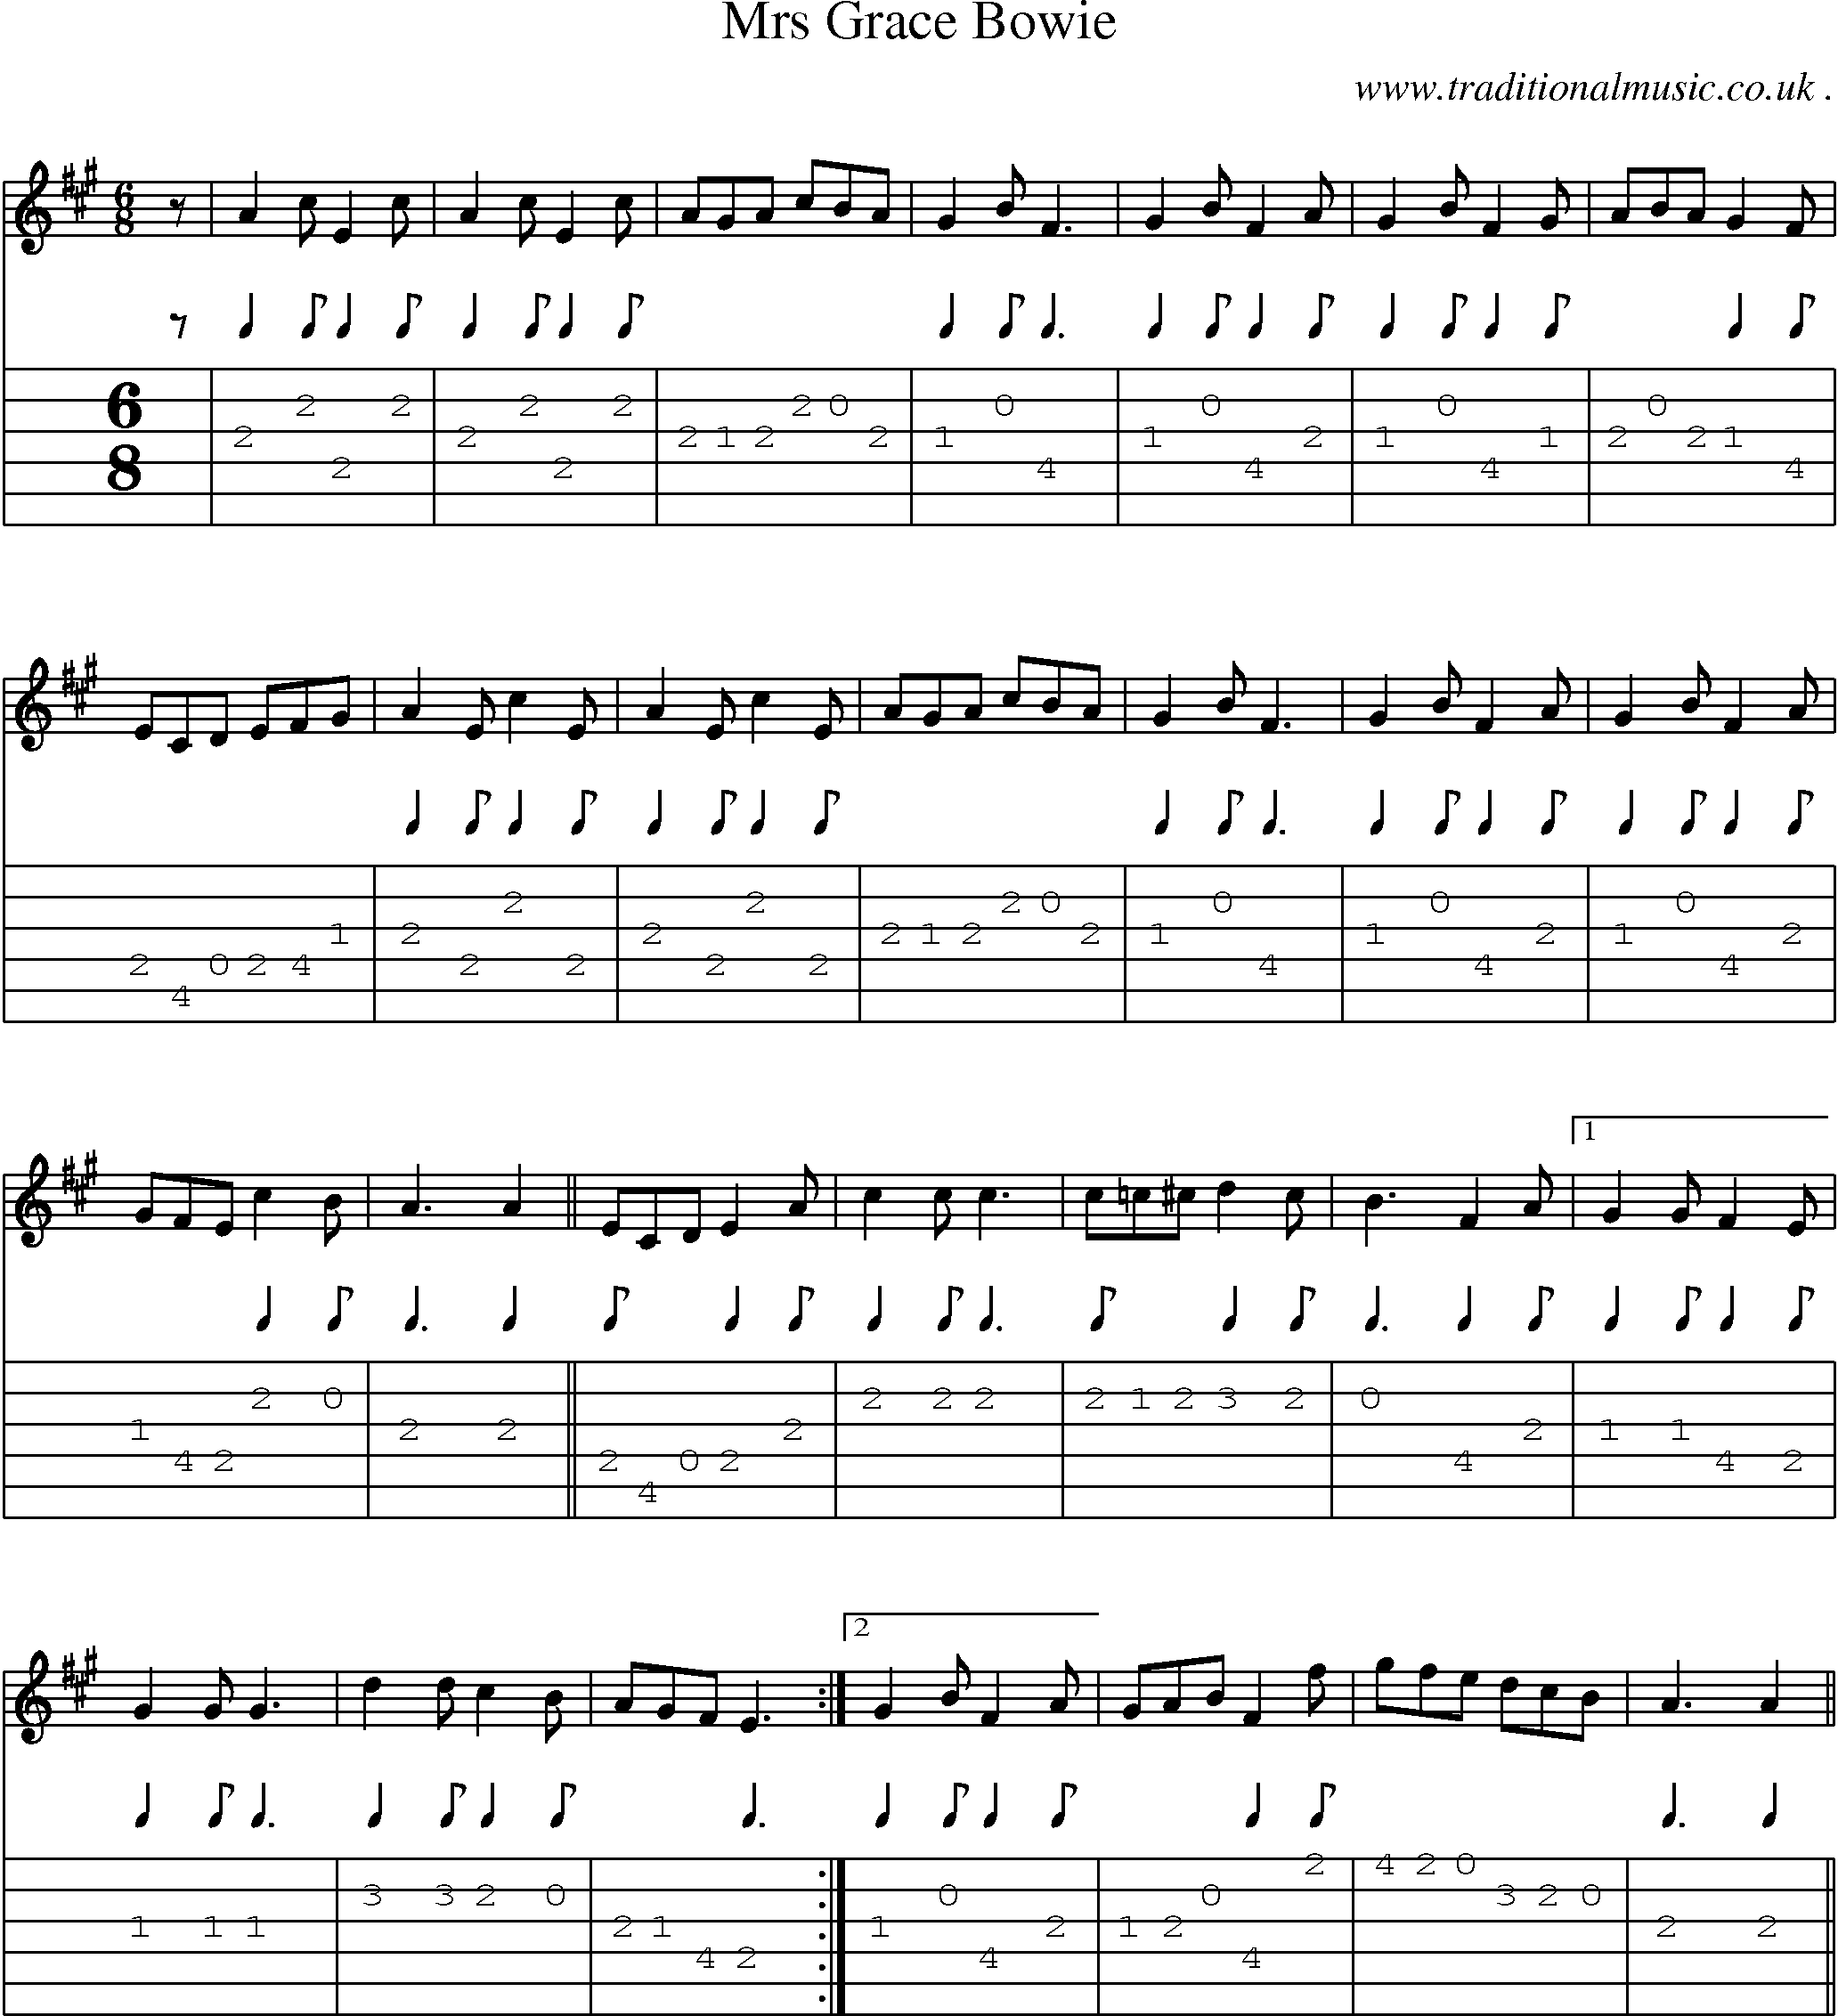 Sheet-Music and Guitar Tabs for Mrs Grace Bowie